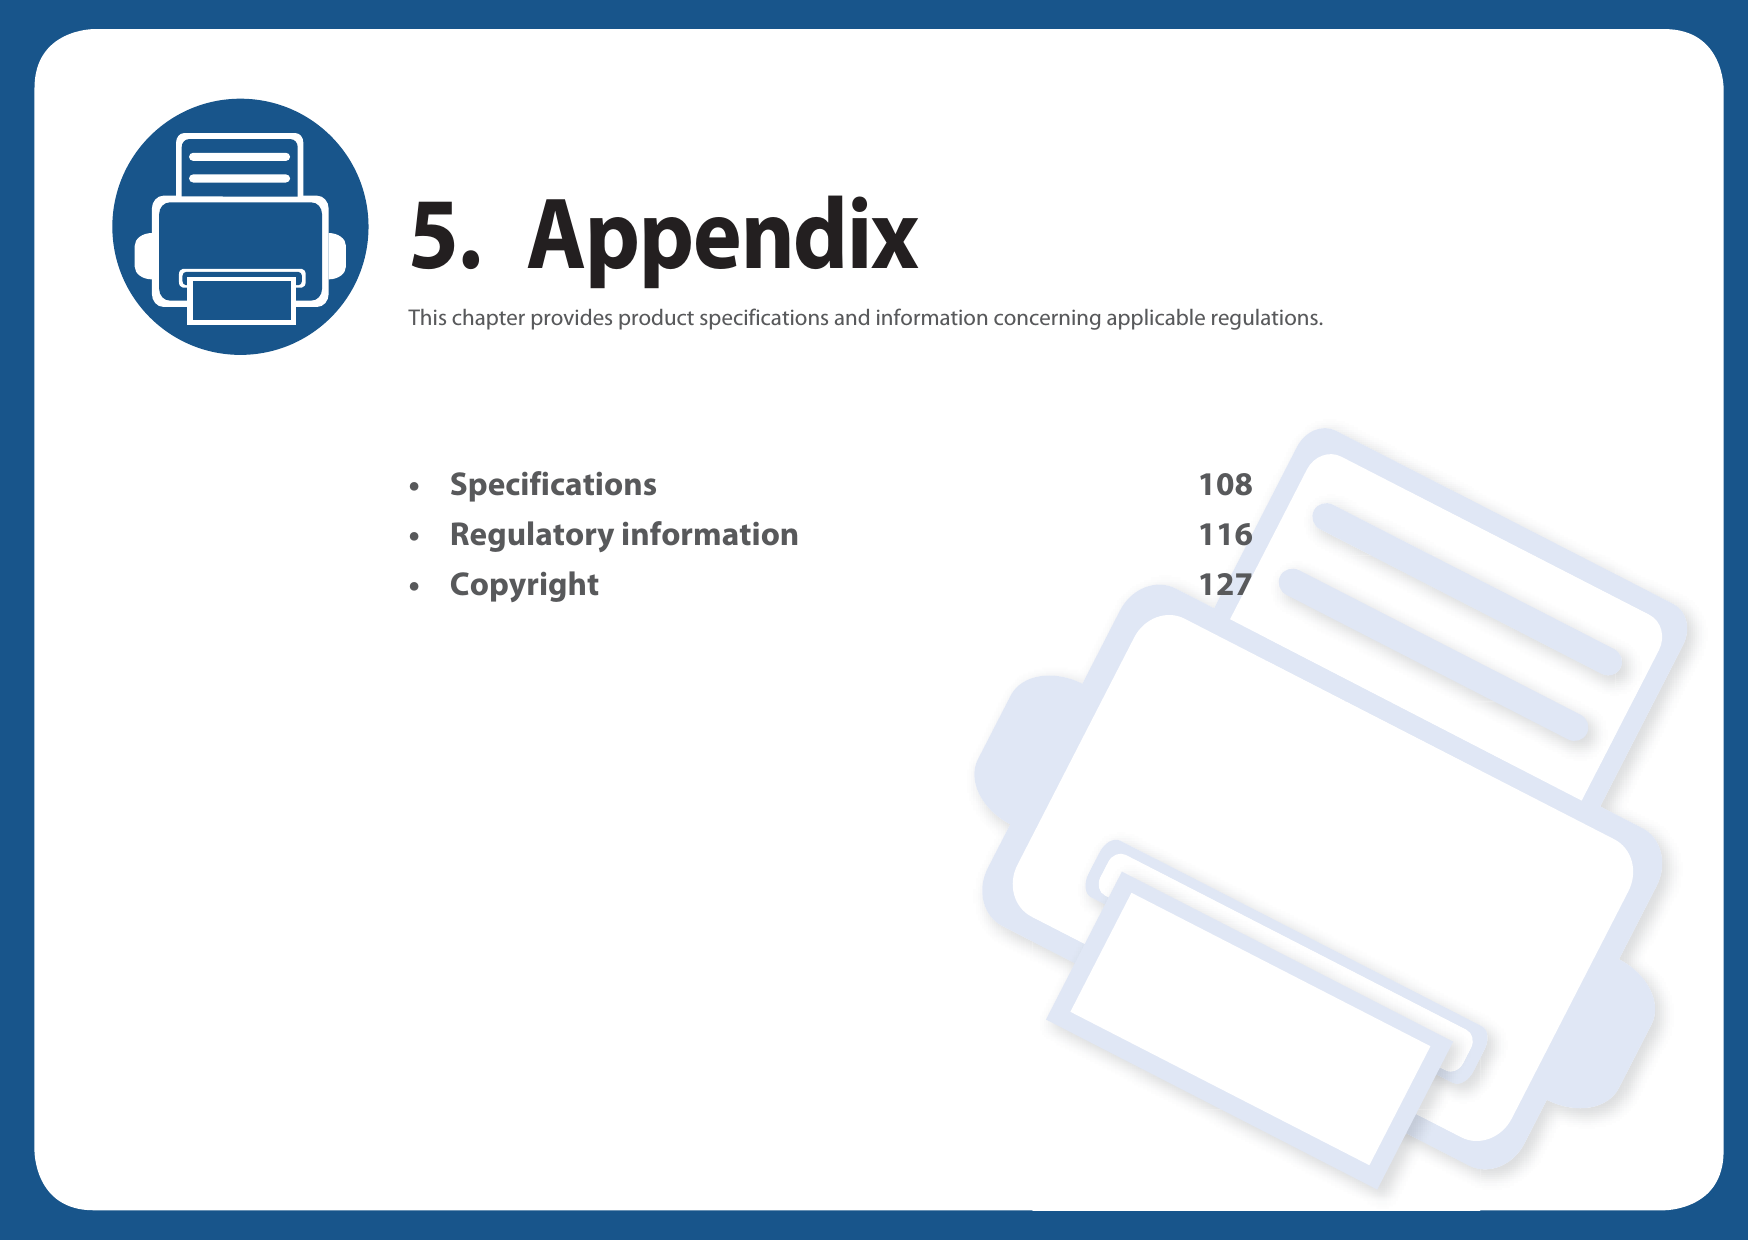 5. AppendixThis chapter provides product specifications and information concerning applicable regulations.• Specifications 108• Regulatory information 116• Copyright 127